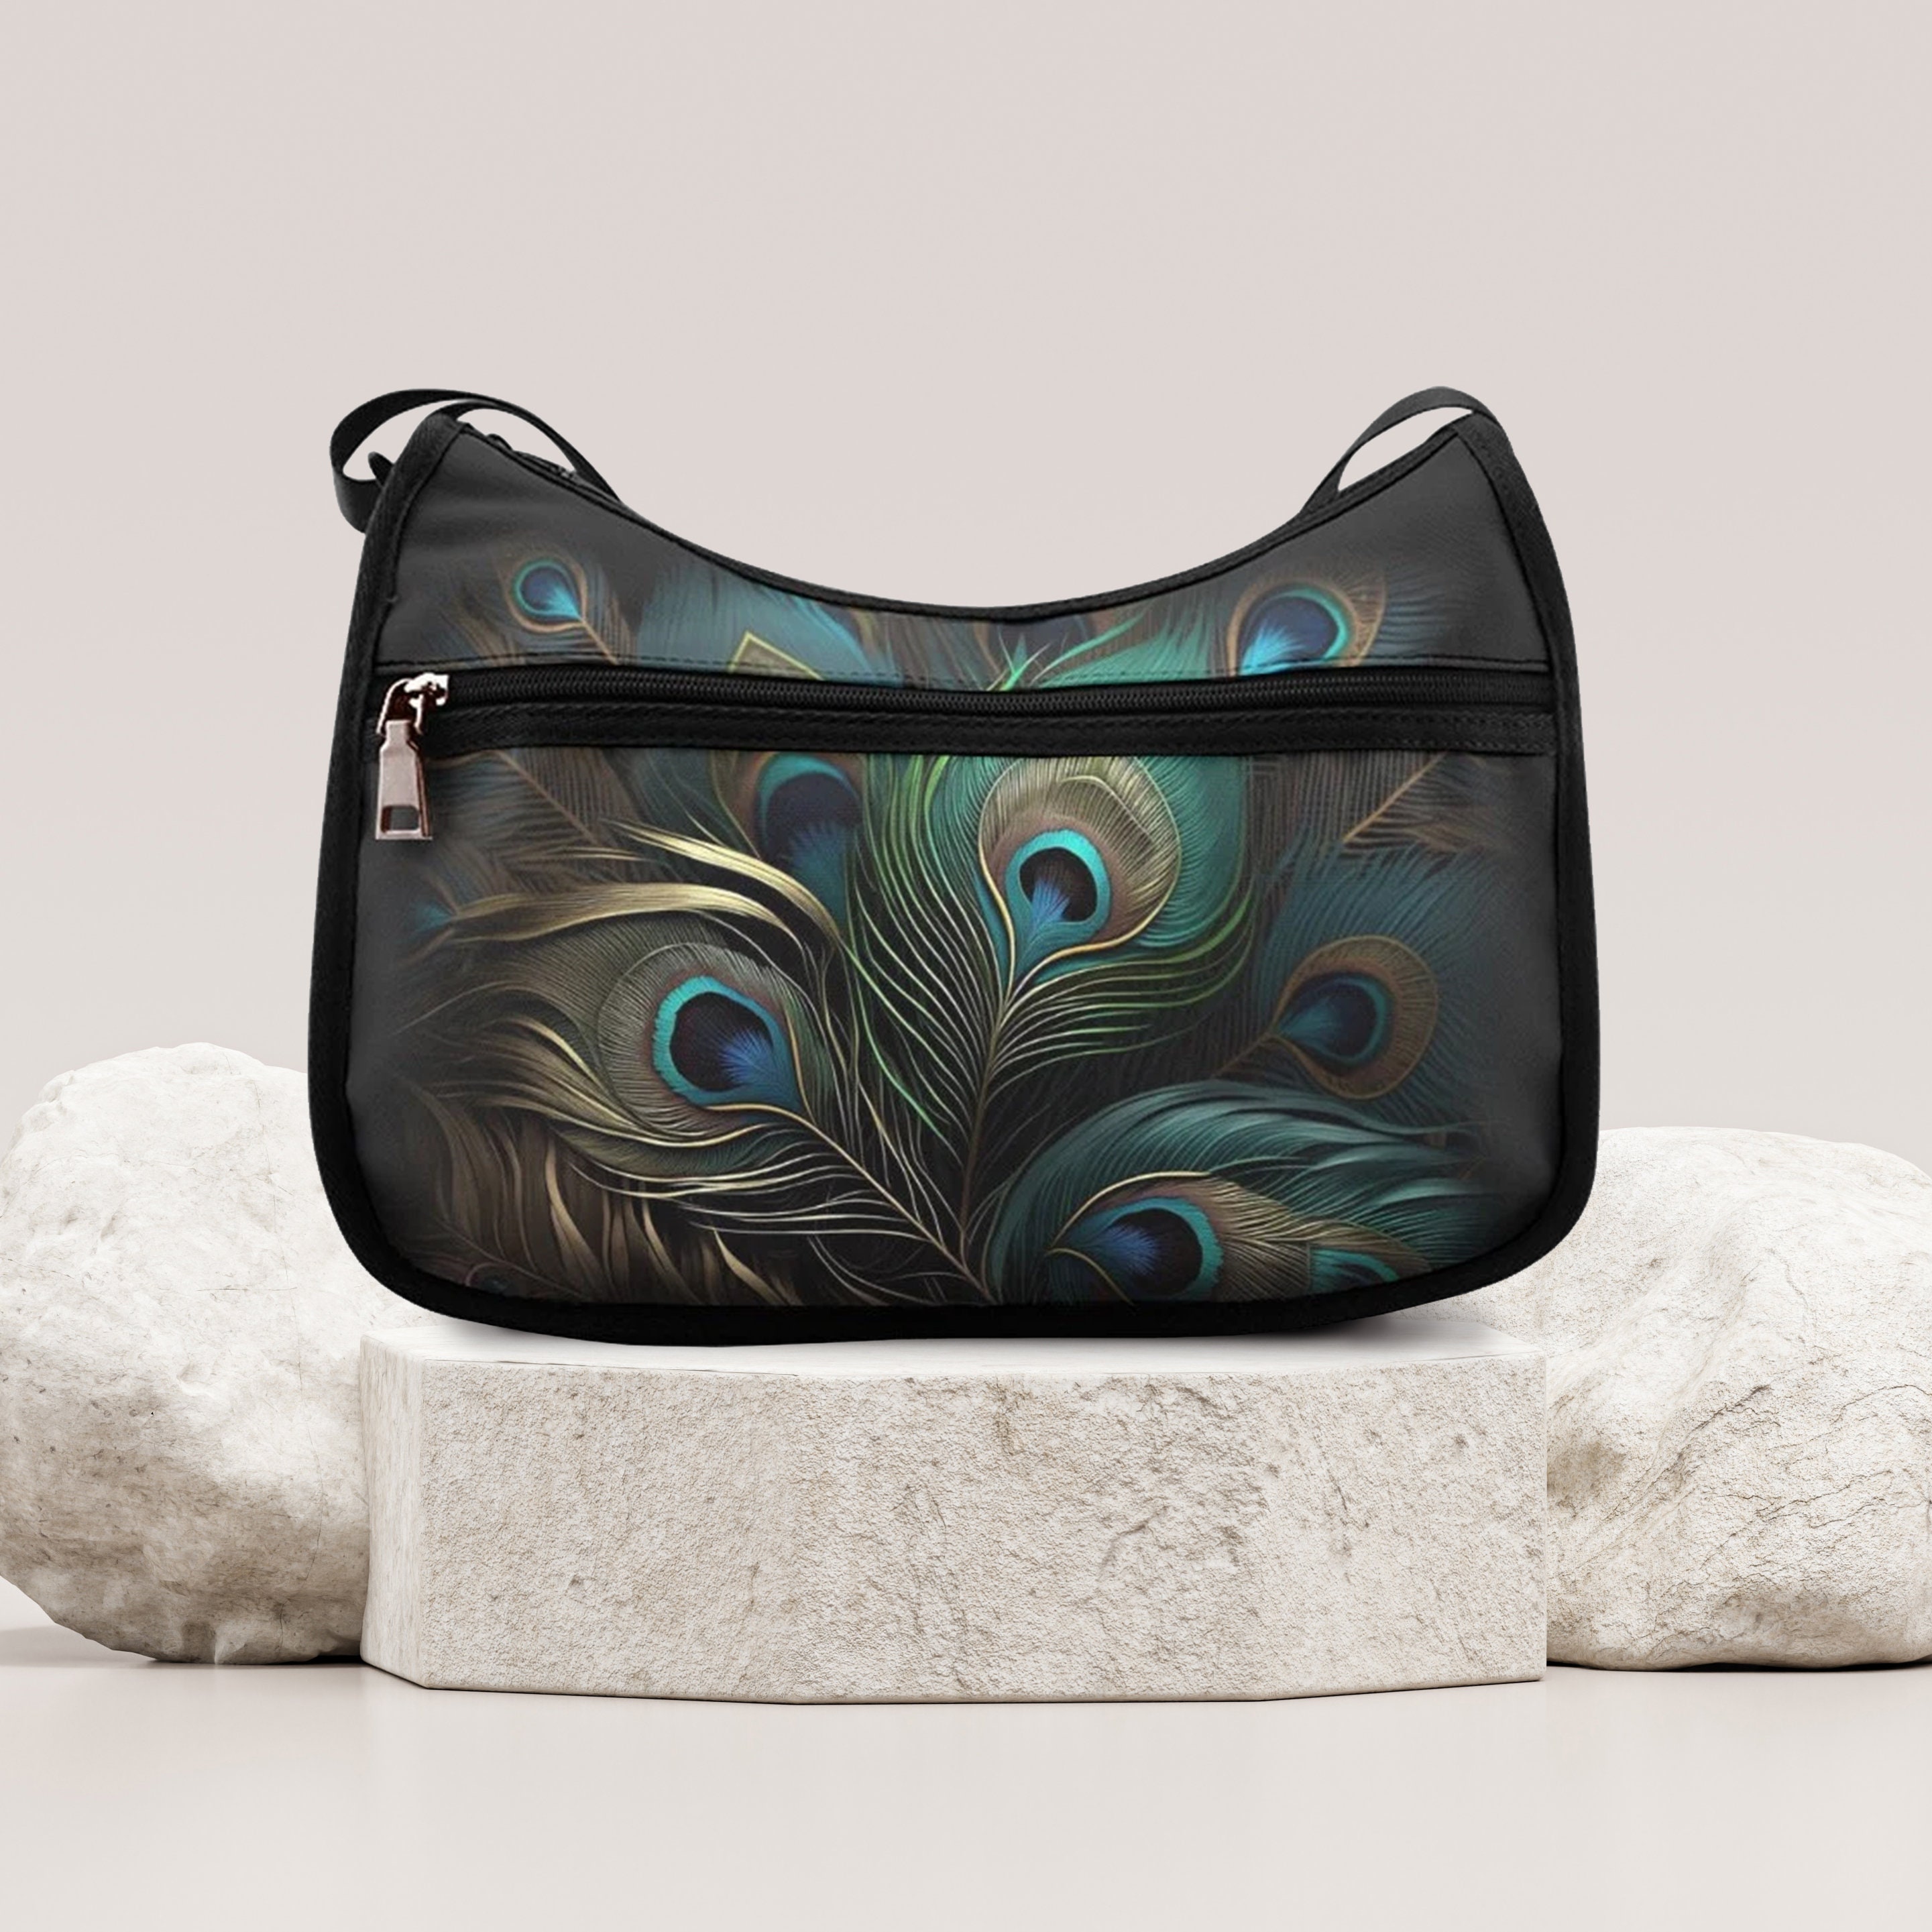 Feather Purse Clutch With Turquoise and Black Feathers and Jeweled